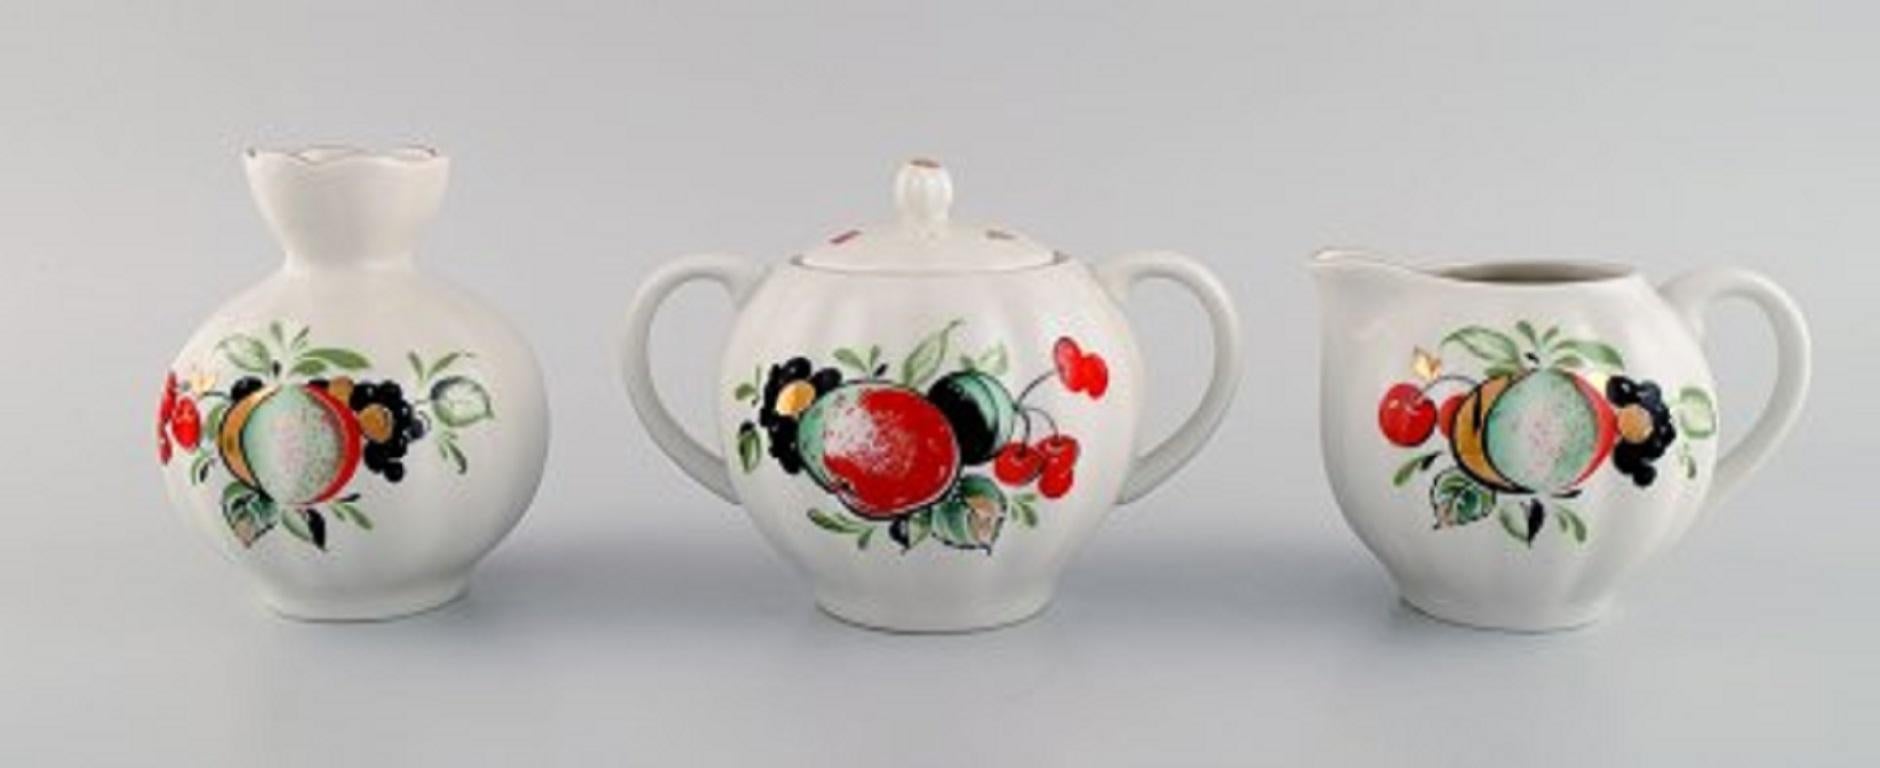 The Imperial Lomonosov Porcelain Factory, Soviet Union. Large tea service in hand-painted porcelain for six people. Mid-20th century.
Consisting of six teacups with saucers, six plates, sugar/cream set, teapot, large dish, compote and vase.
The